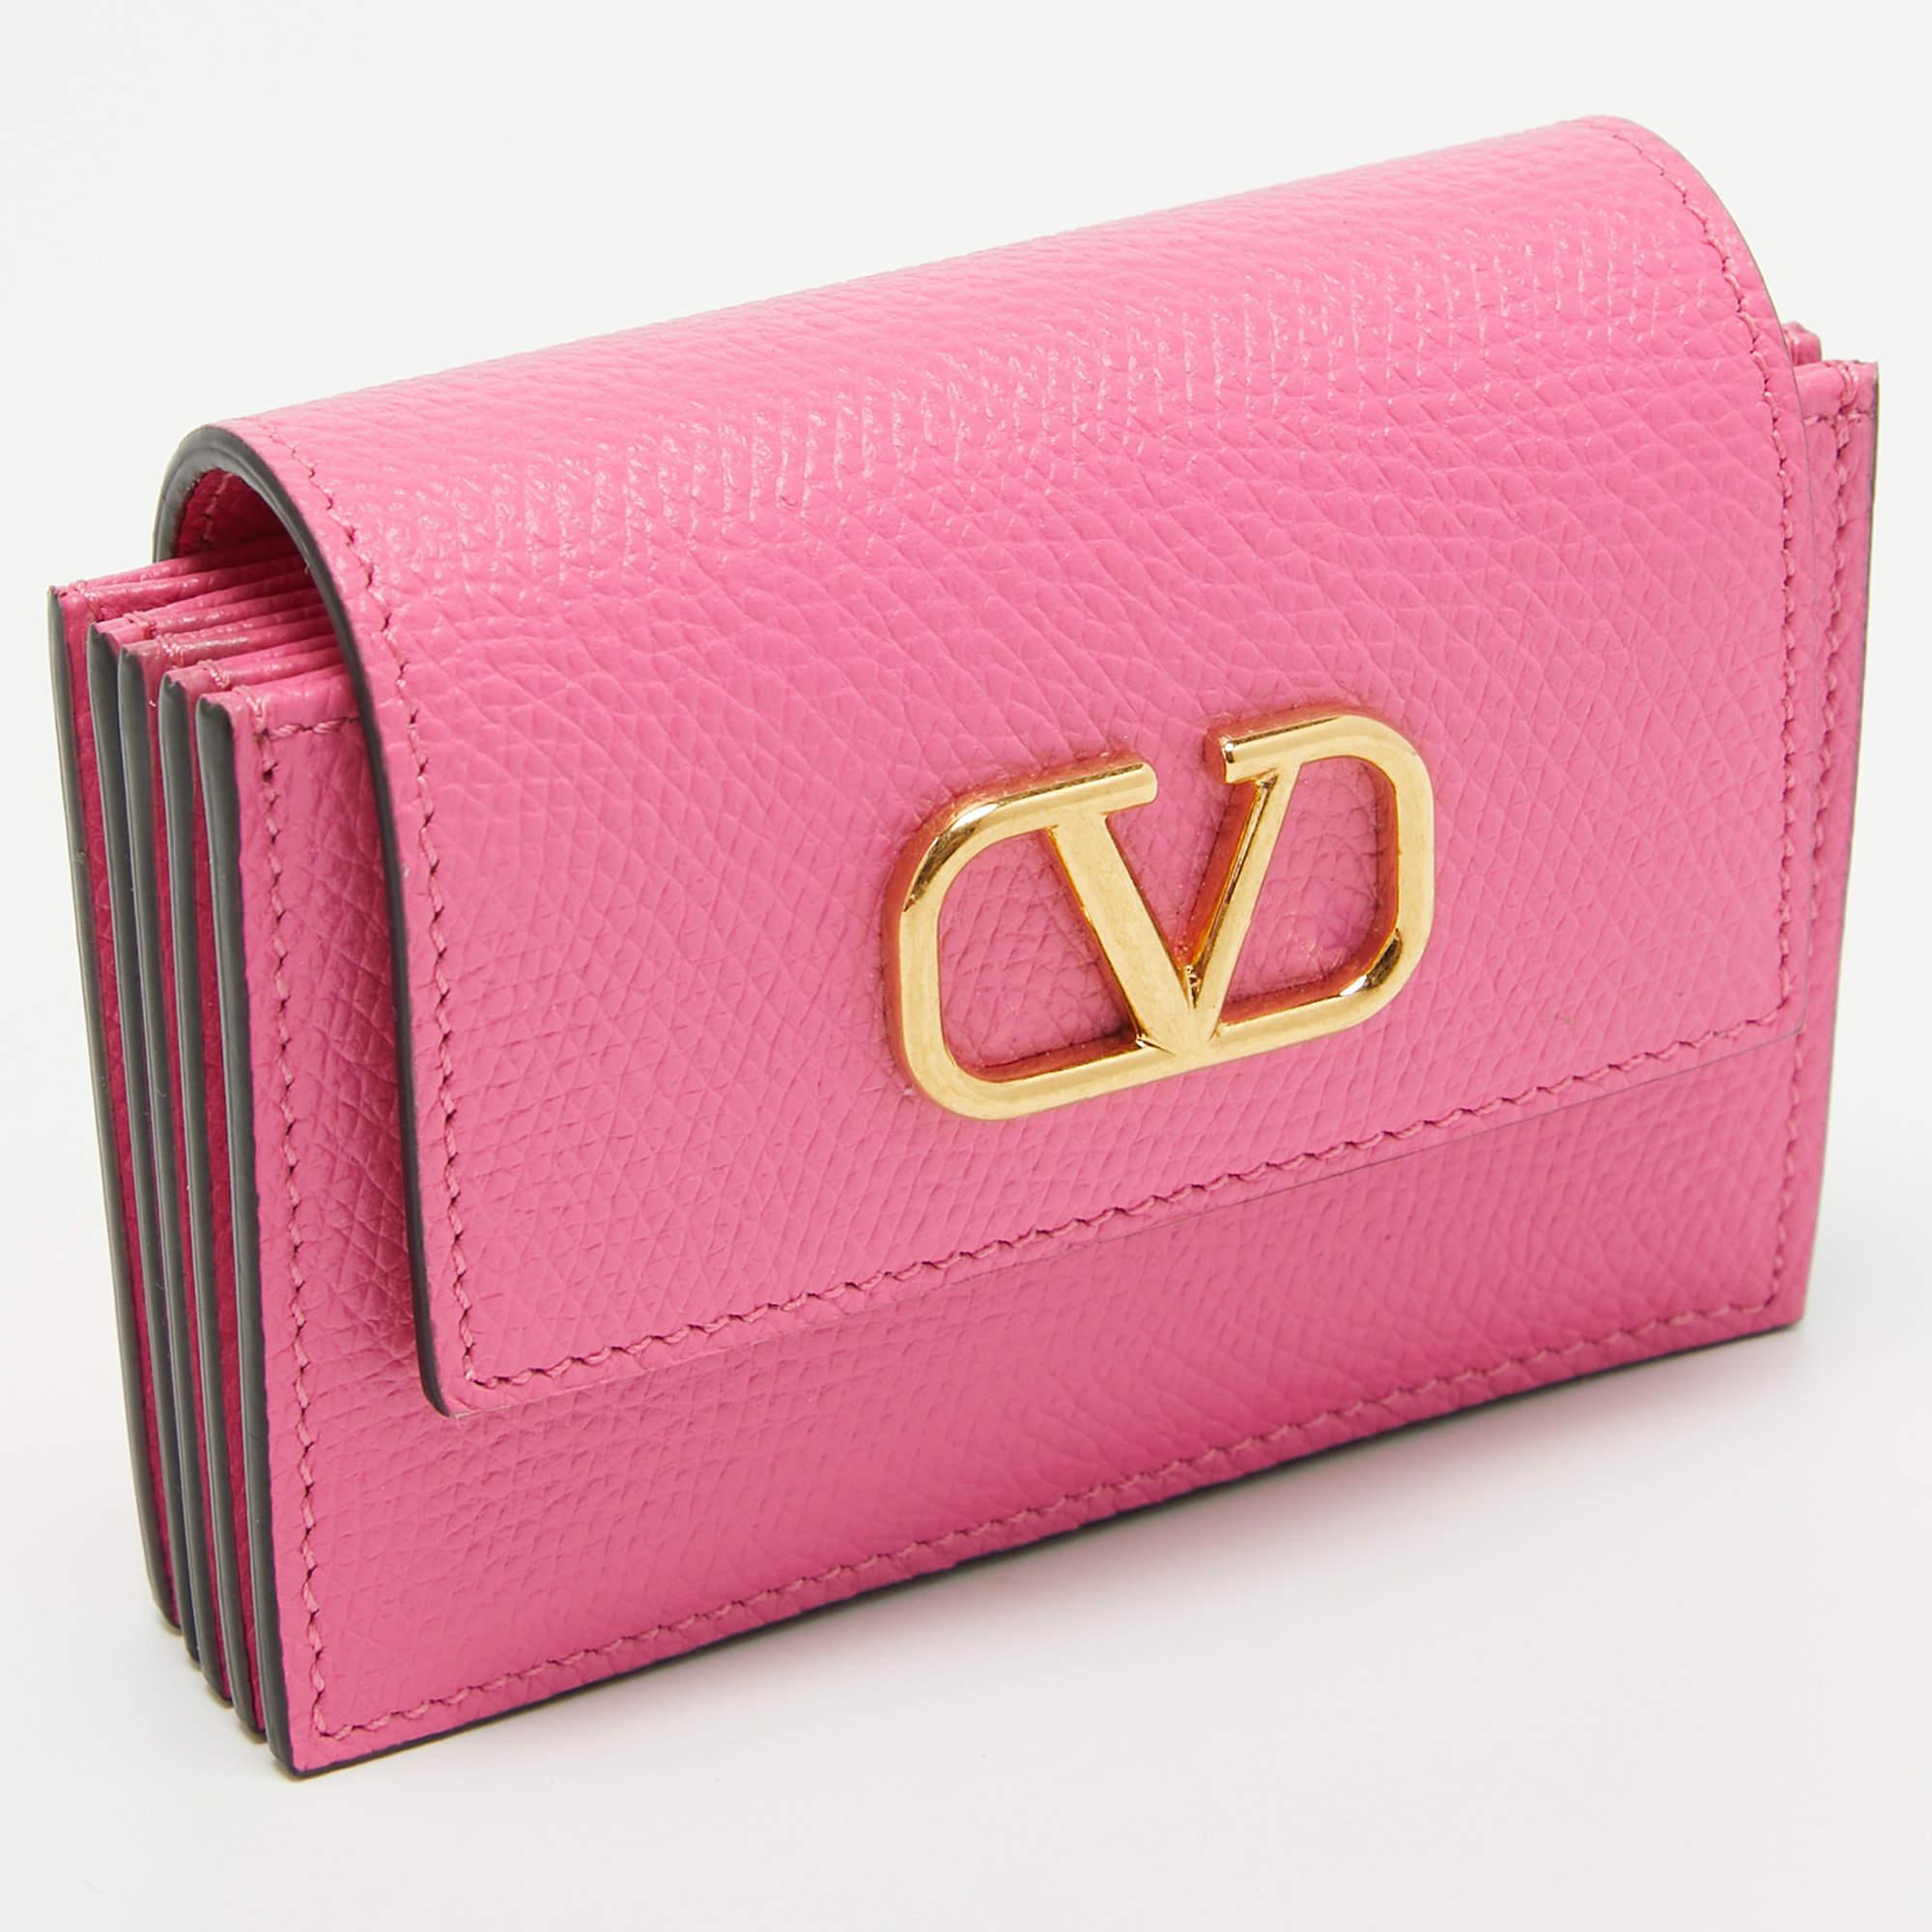 The Valentino card holder is a practical accessory highlighted by the famous VLogo. This compact and stylish piece is perfect for organizing and carrying your cards and cash with a touch of elegance.

Includes
Original Dustbag, Original Box, Info